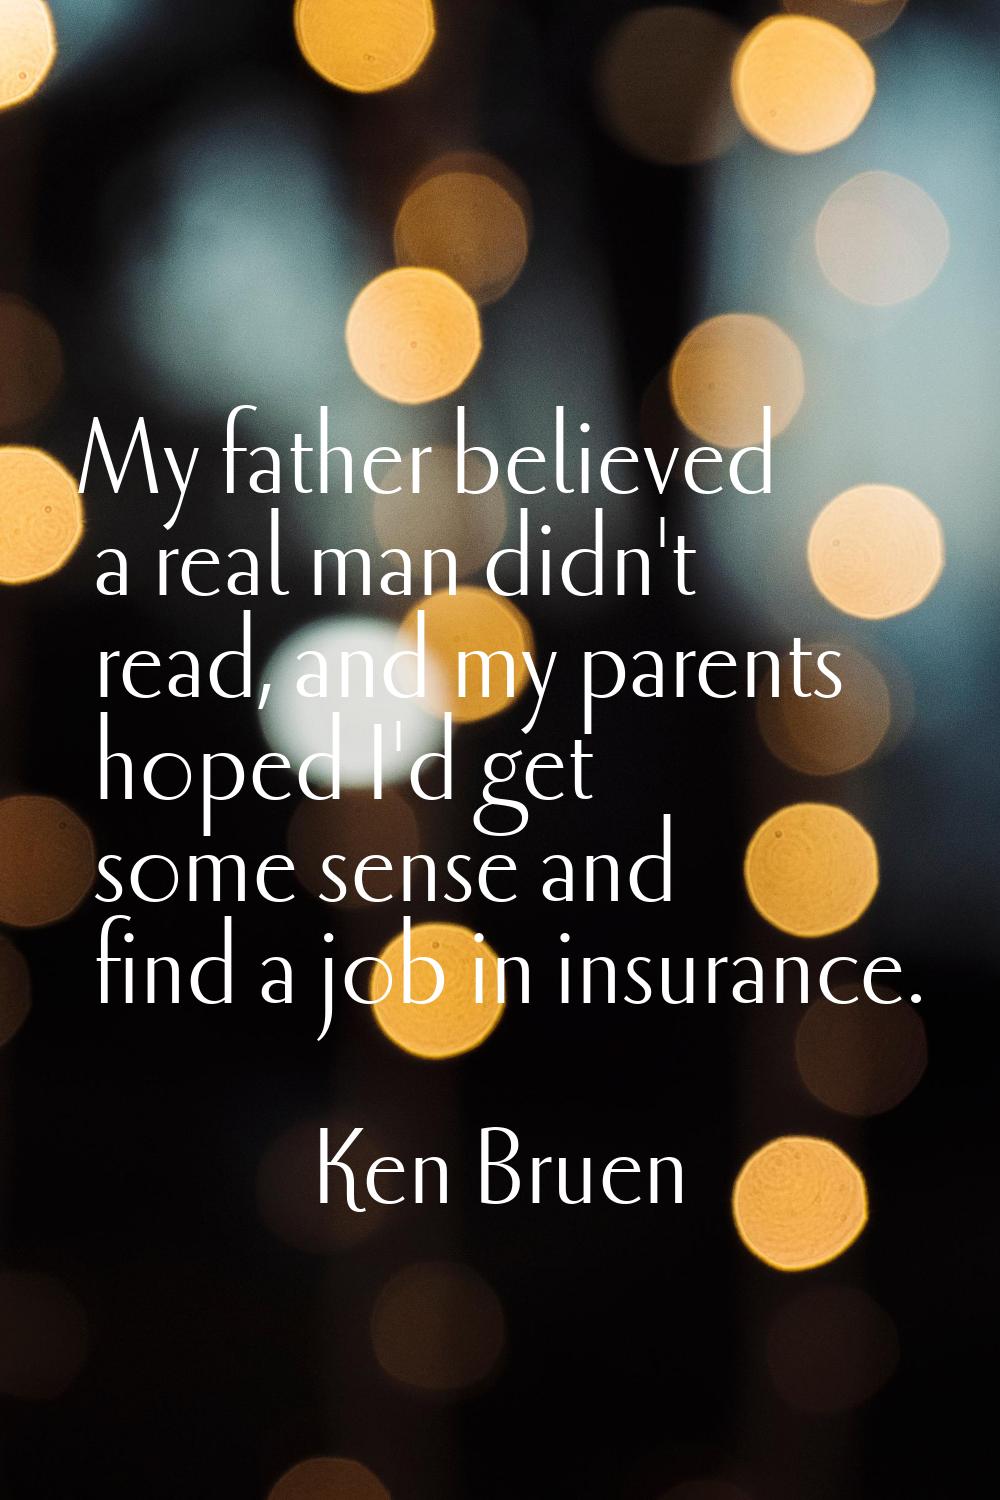 My father believed a real man didn't read, and my parents hoped I'd get some sense and find a job i